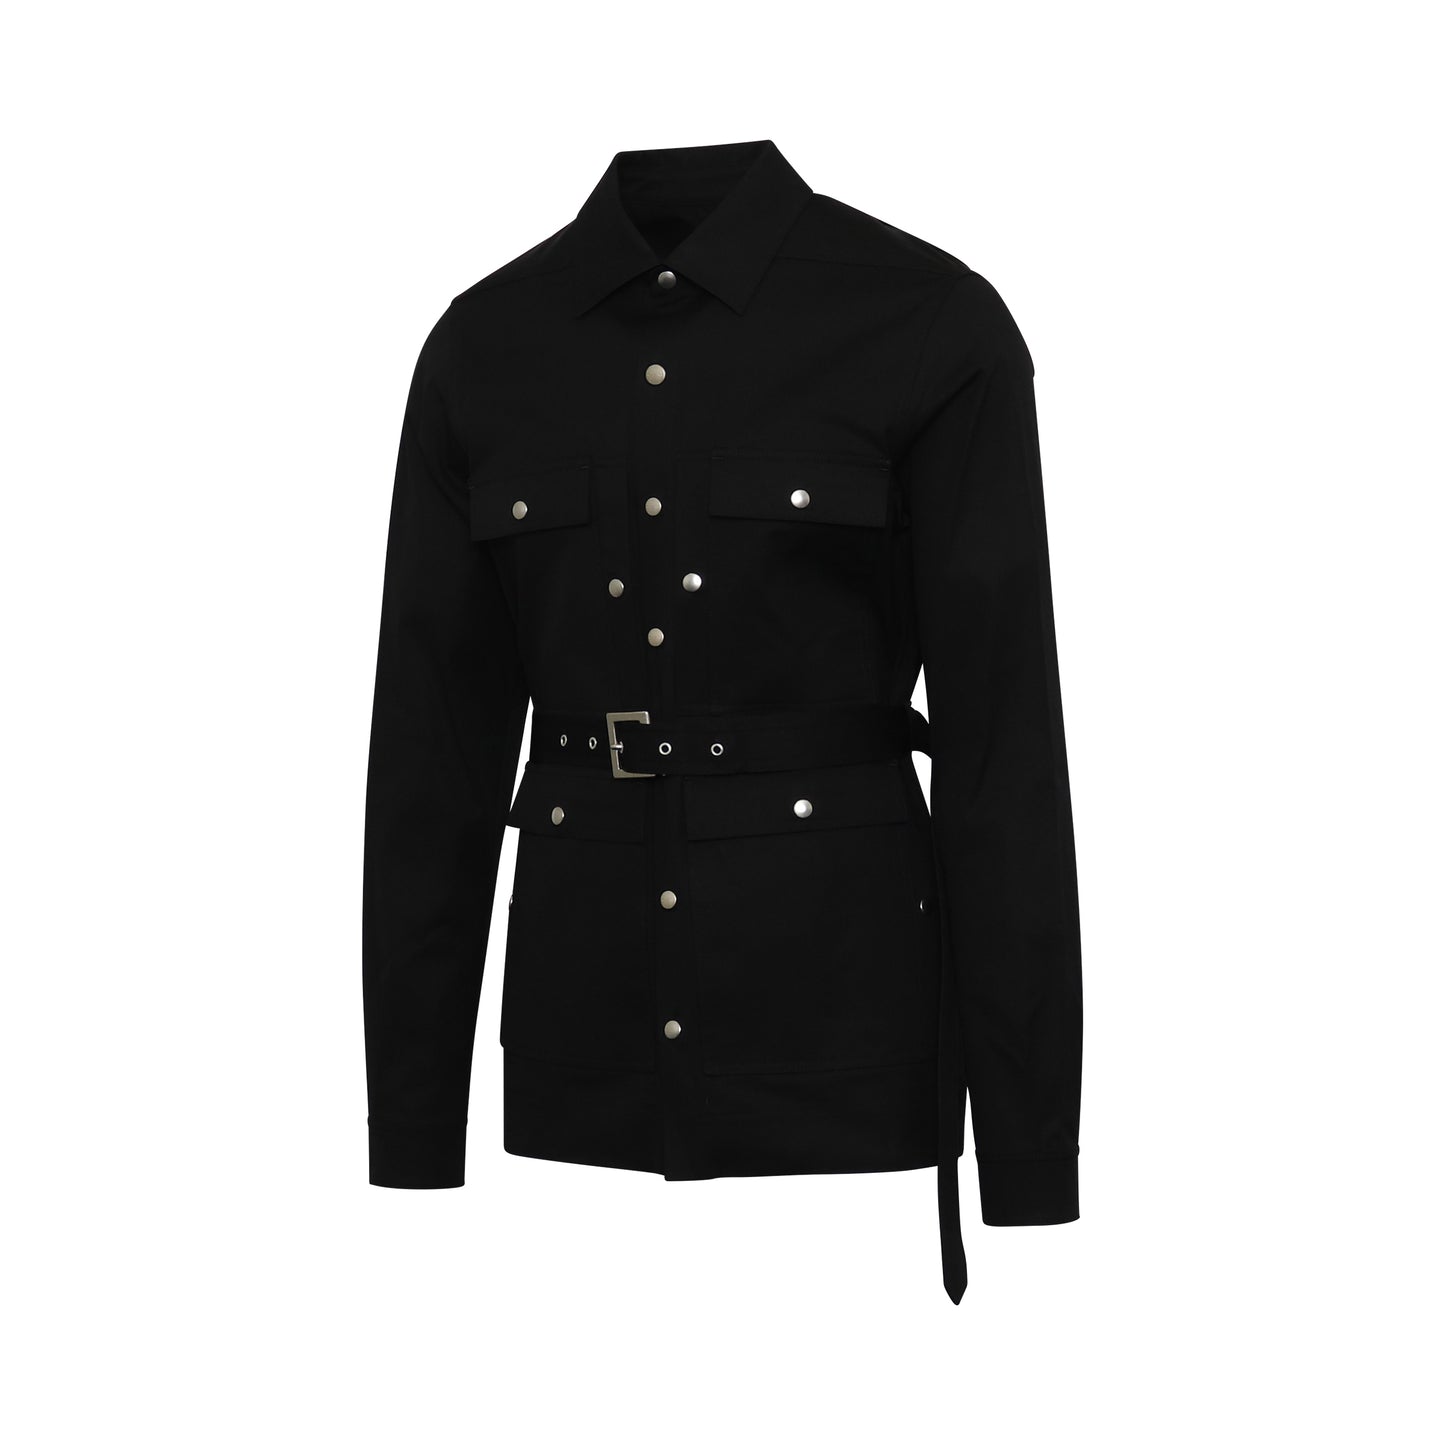 4 Pockets Outershirt Jacket in Black